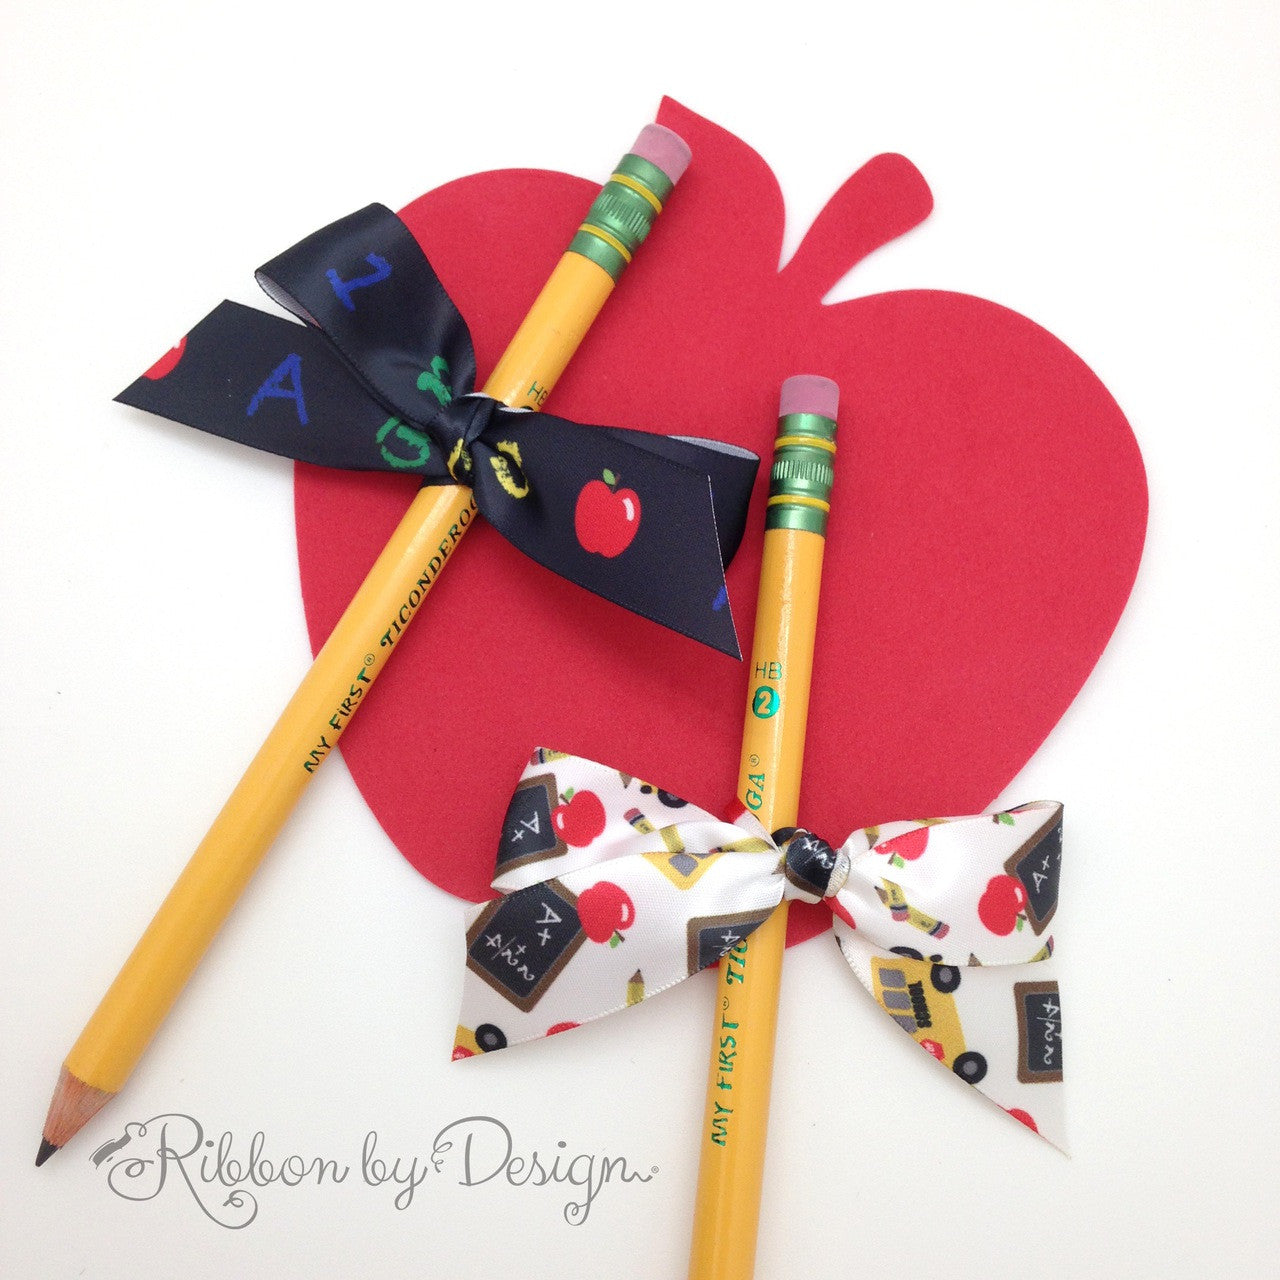 Back to School! Make the day special with little gifts for the teacher or student tied with these fun ribbons!